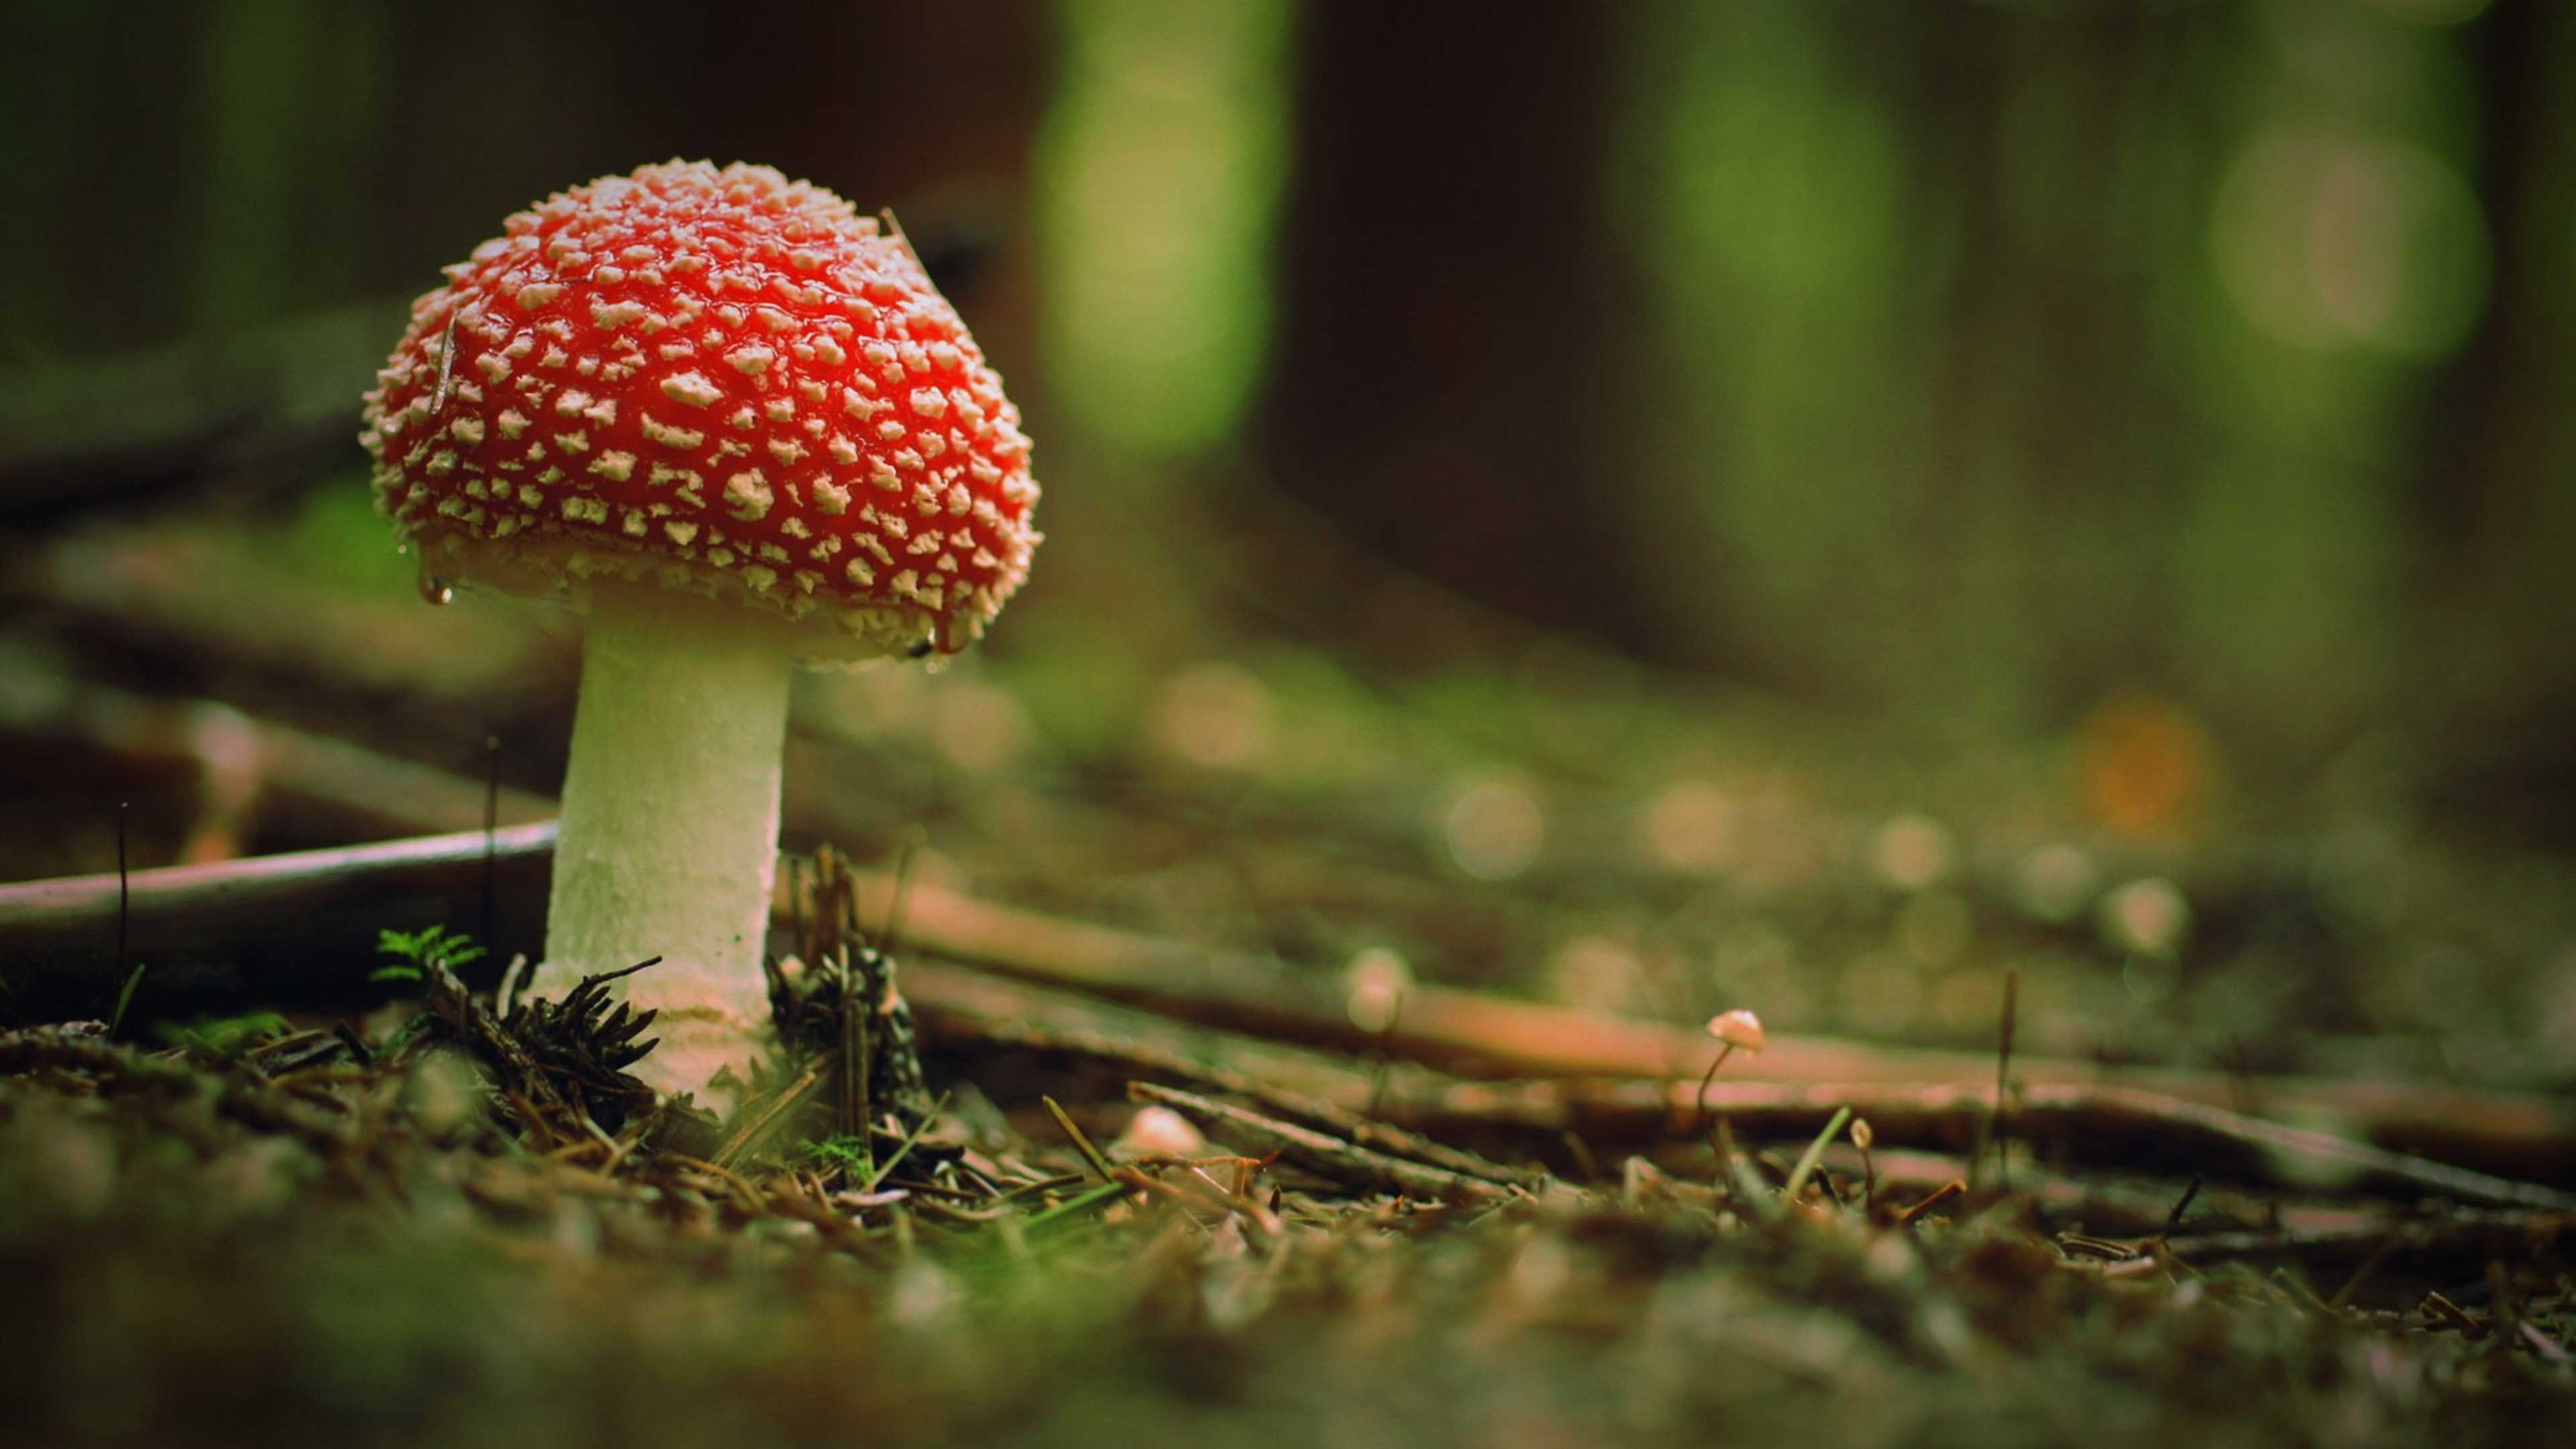 Download Wallpaper 3840x2160 Beautiful poison mushroom in the woods